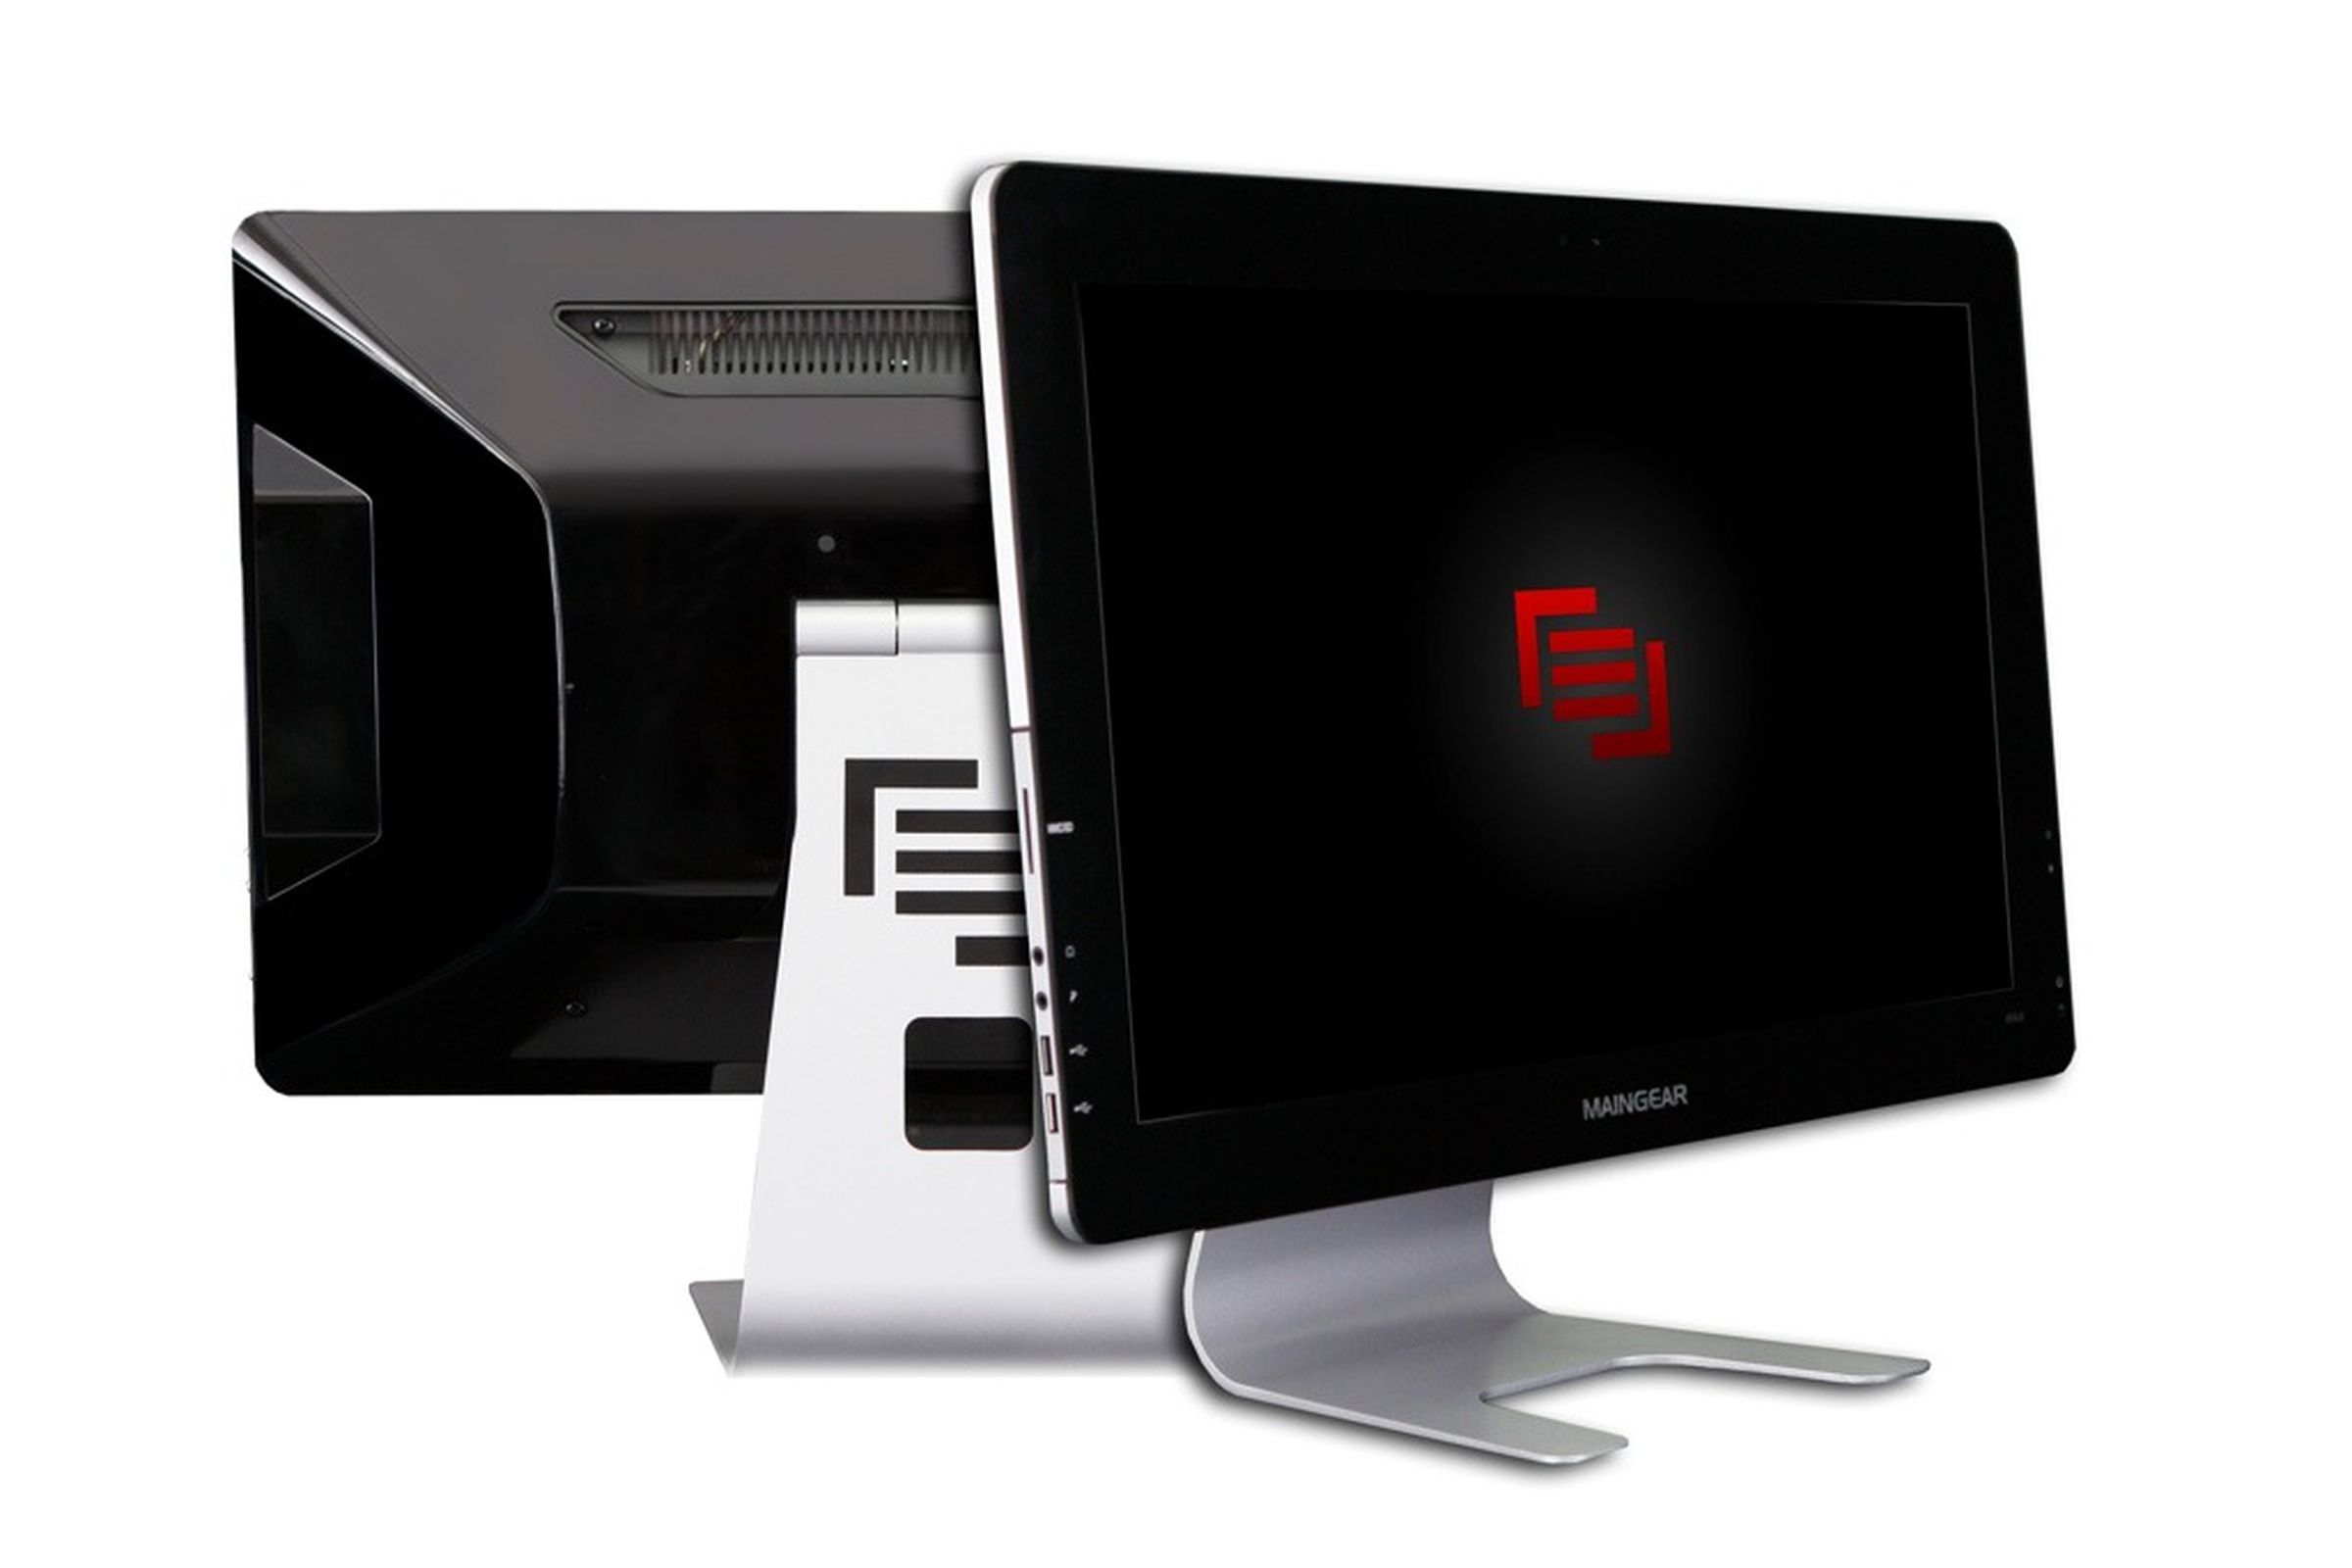 Gallery Photo: Maingear Solo 21 all-in-one PC official photos